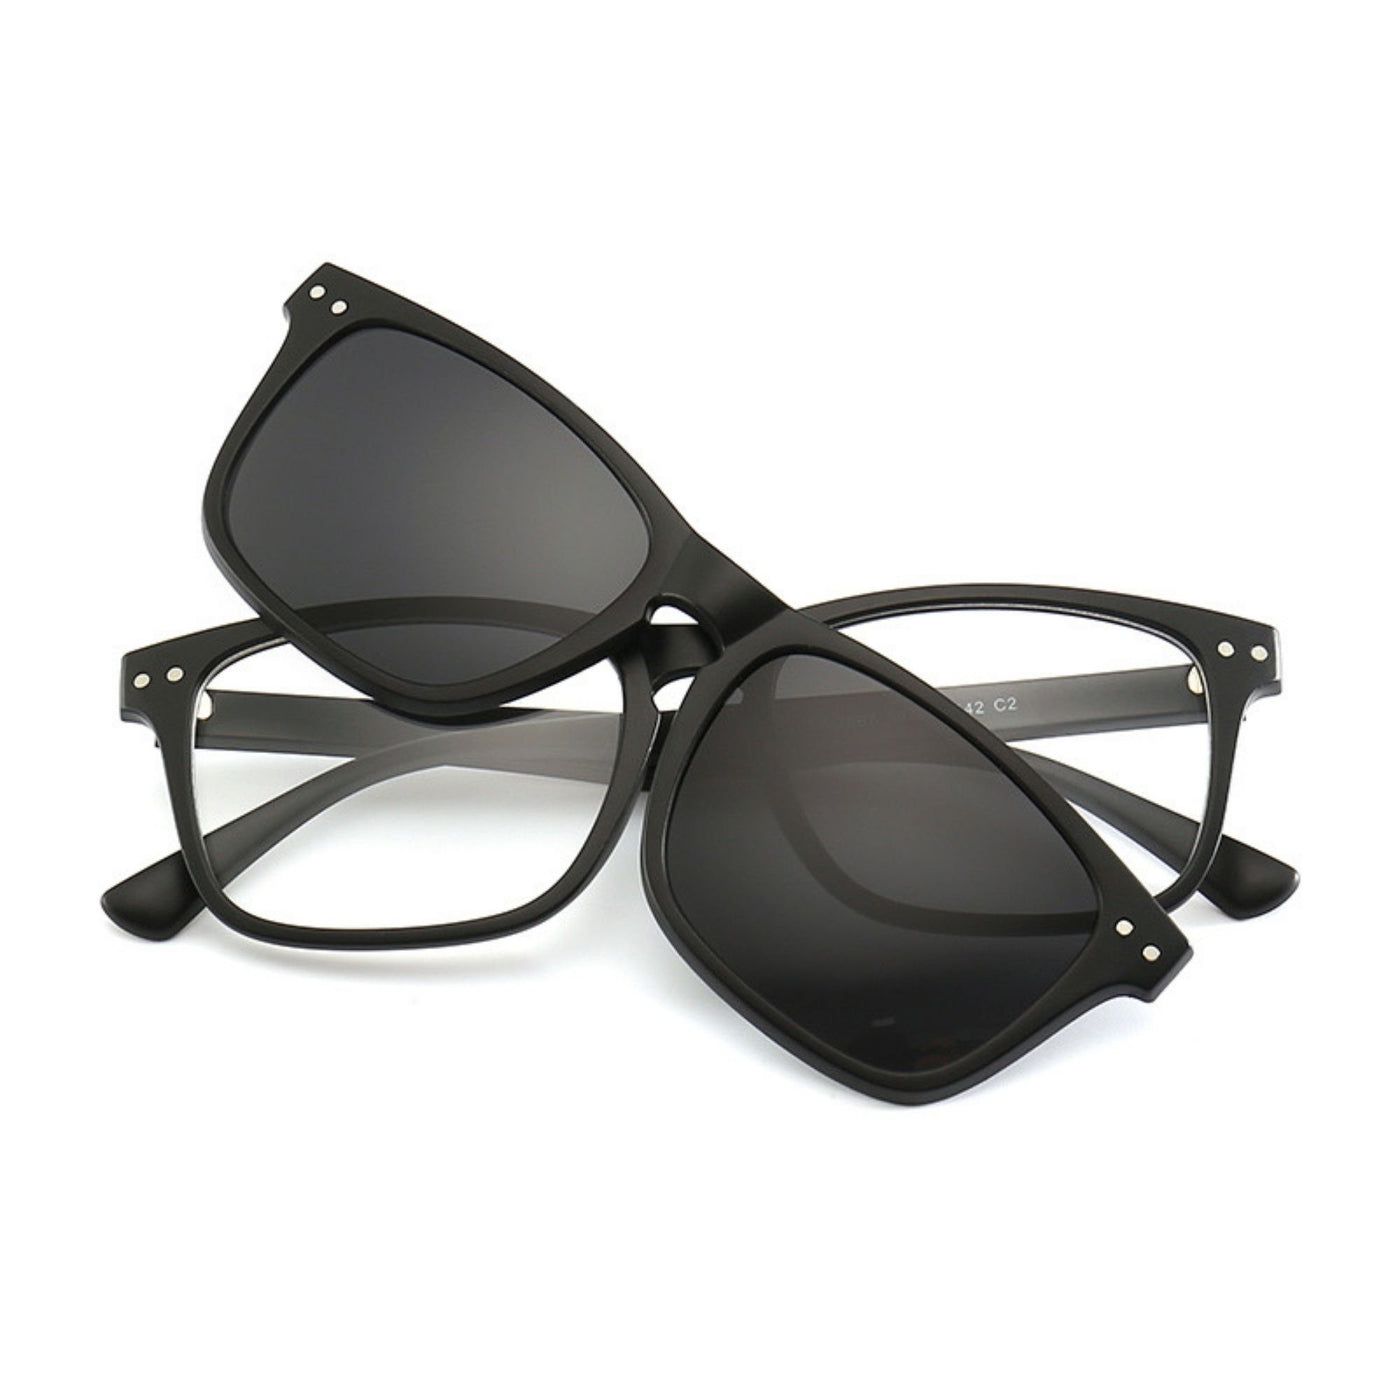 Classic Wilder Changeable Lens Eyewear For Men And Women-Unique and Classy